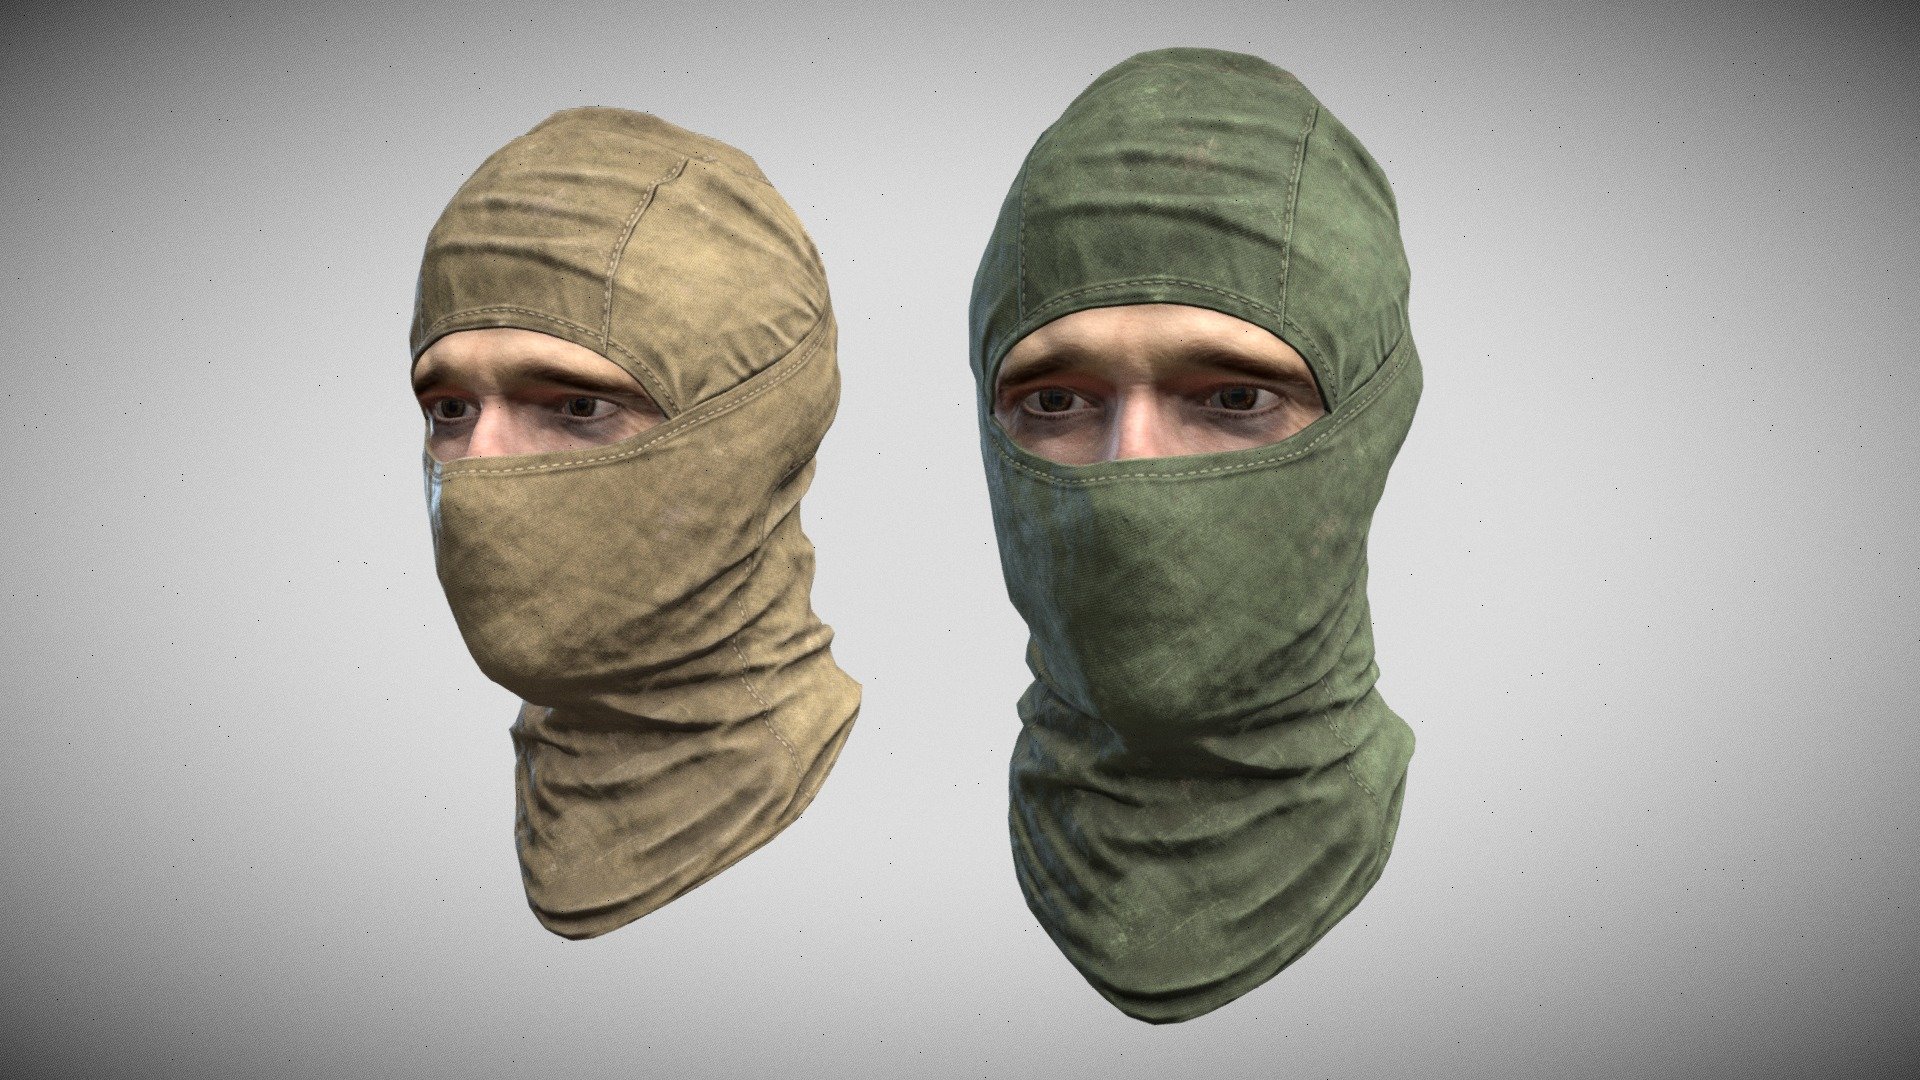 Game-Ready PBR low-poly model of military balaclava.
All materials and textures are included.
The textures of the model are applied with UV Unwrap.
Normal map was baked from a high poly model.
Including 3dsmax and Blender, OBJ and FBX.

3561 polygons
5642 triangles
2960 vertices

Maps:

balaclava_AO.tga, balaclava_Curvature.tga, balaclava_Grossiness.tga, balaclava_Metallic.tga, balaclava_Roughness.tga, balaclava_Specular.tga, balaclava_Normal.tga, balaclava_Diffuse_Sand.tga, balaclava_Diffuse_Green.tga (2048x2048)

eyelashes_alpha.tga (512x512) - Military Balaclava - Buy Royalty Free 3D model by alpenwolf (@alpen) 3d model